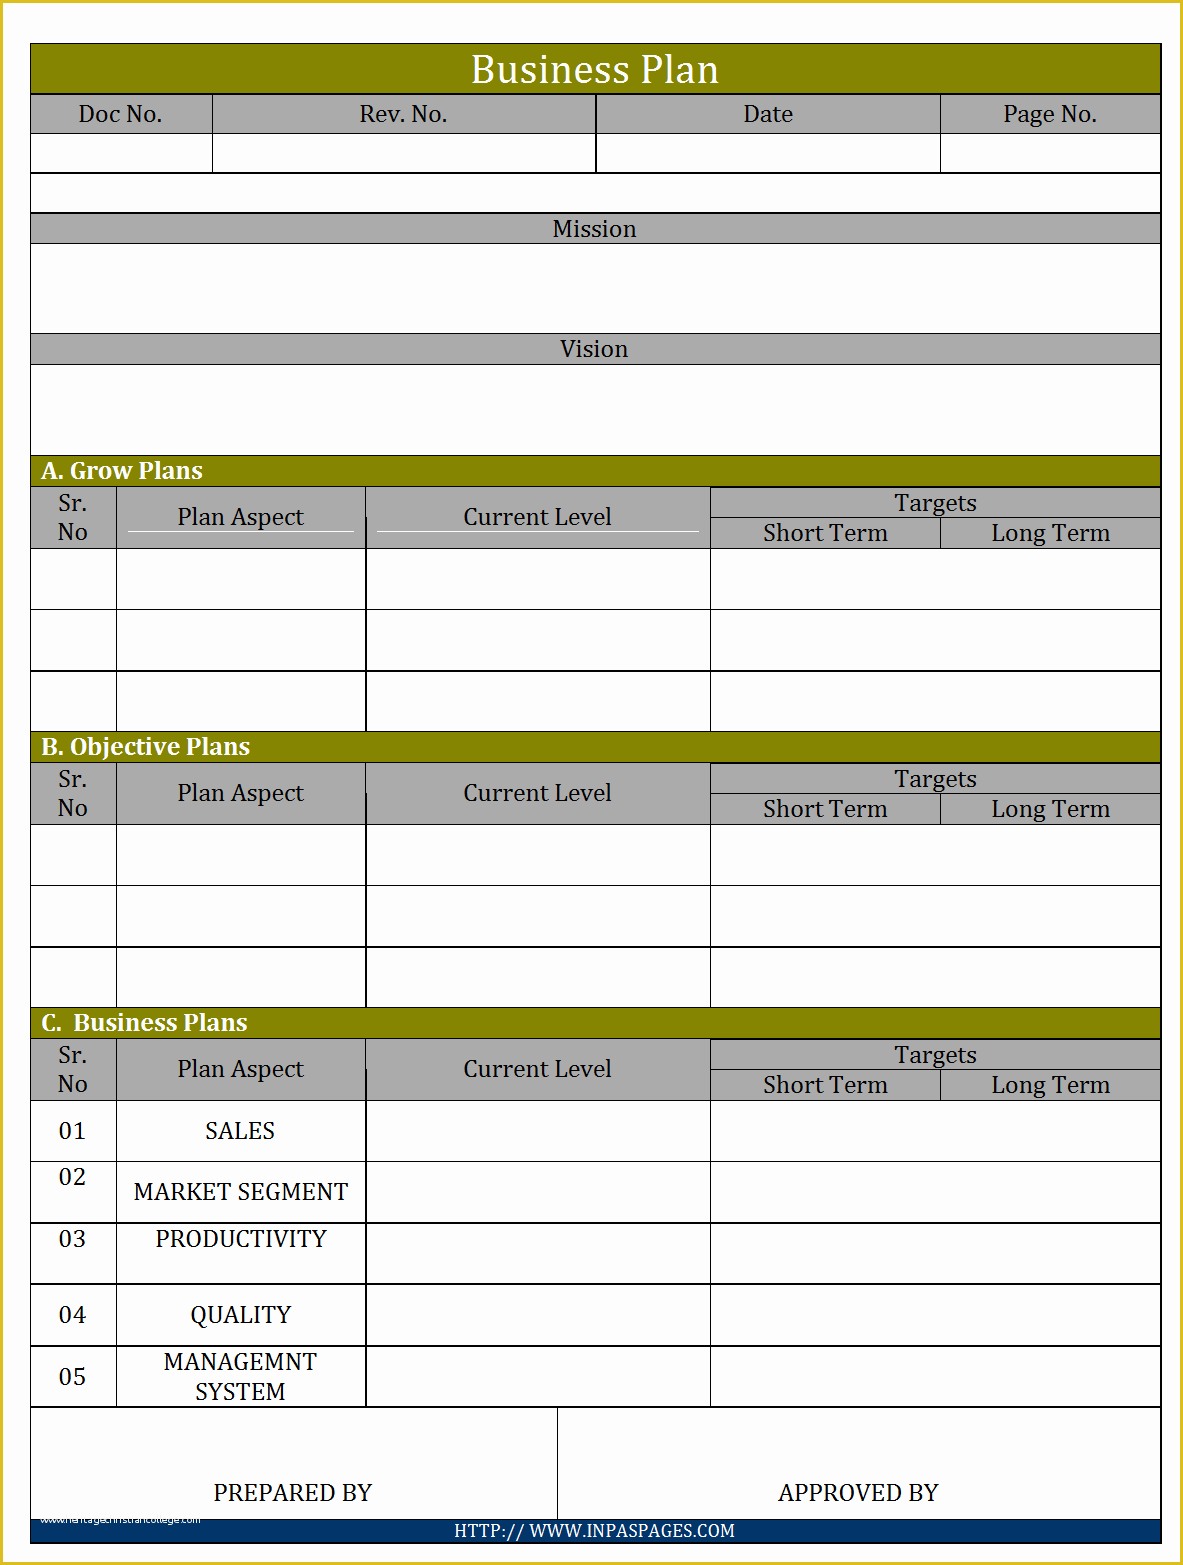 Business Plan Template Free Of Business Plan Template Pdf Free Download